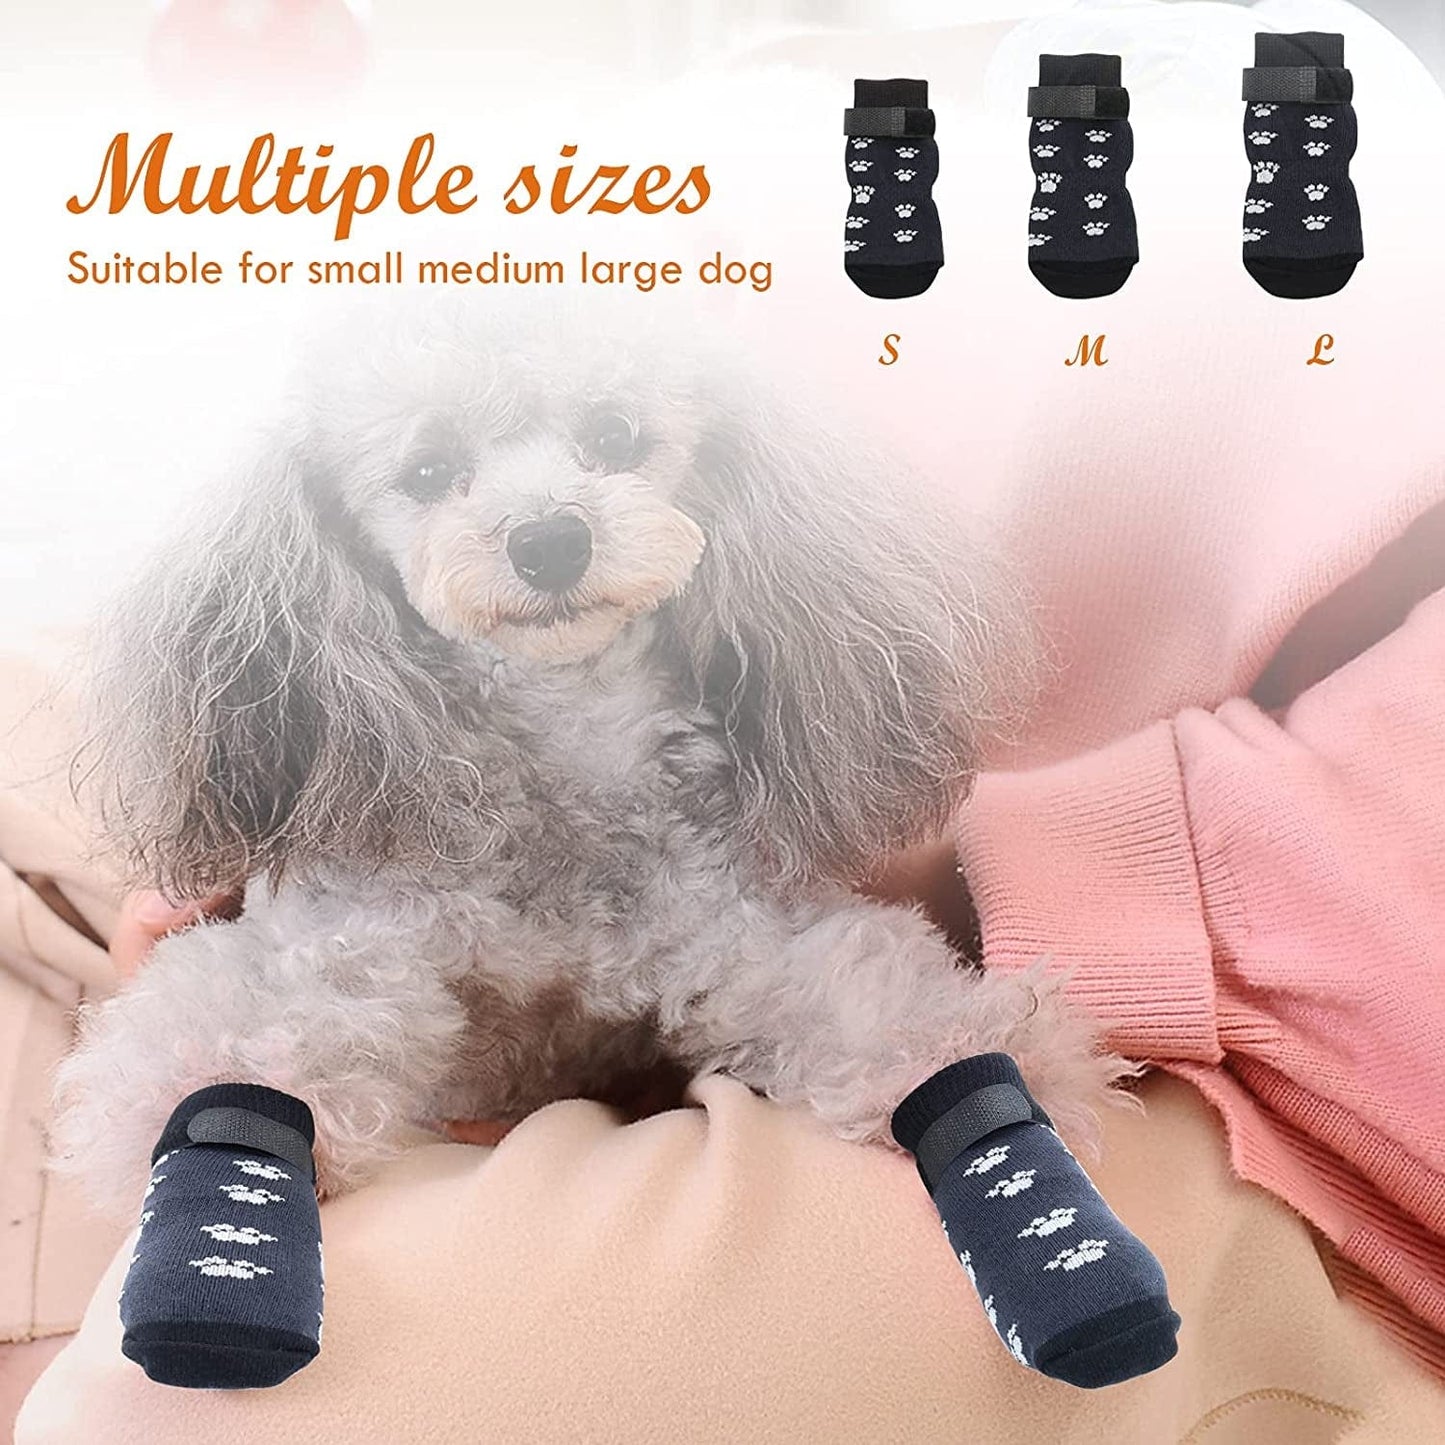  Rypet Anti Slip Dog Socks 3 Pairs - Dog Grip Socks with Straps  Traction Control for Indoor on Hardwood Floor Wear, Pet Paw Protector for  Small Medium Large Dogs L 